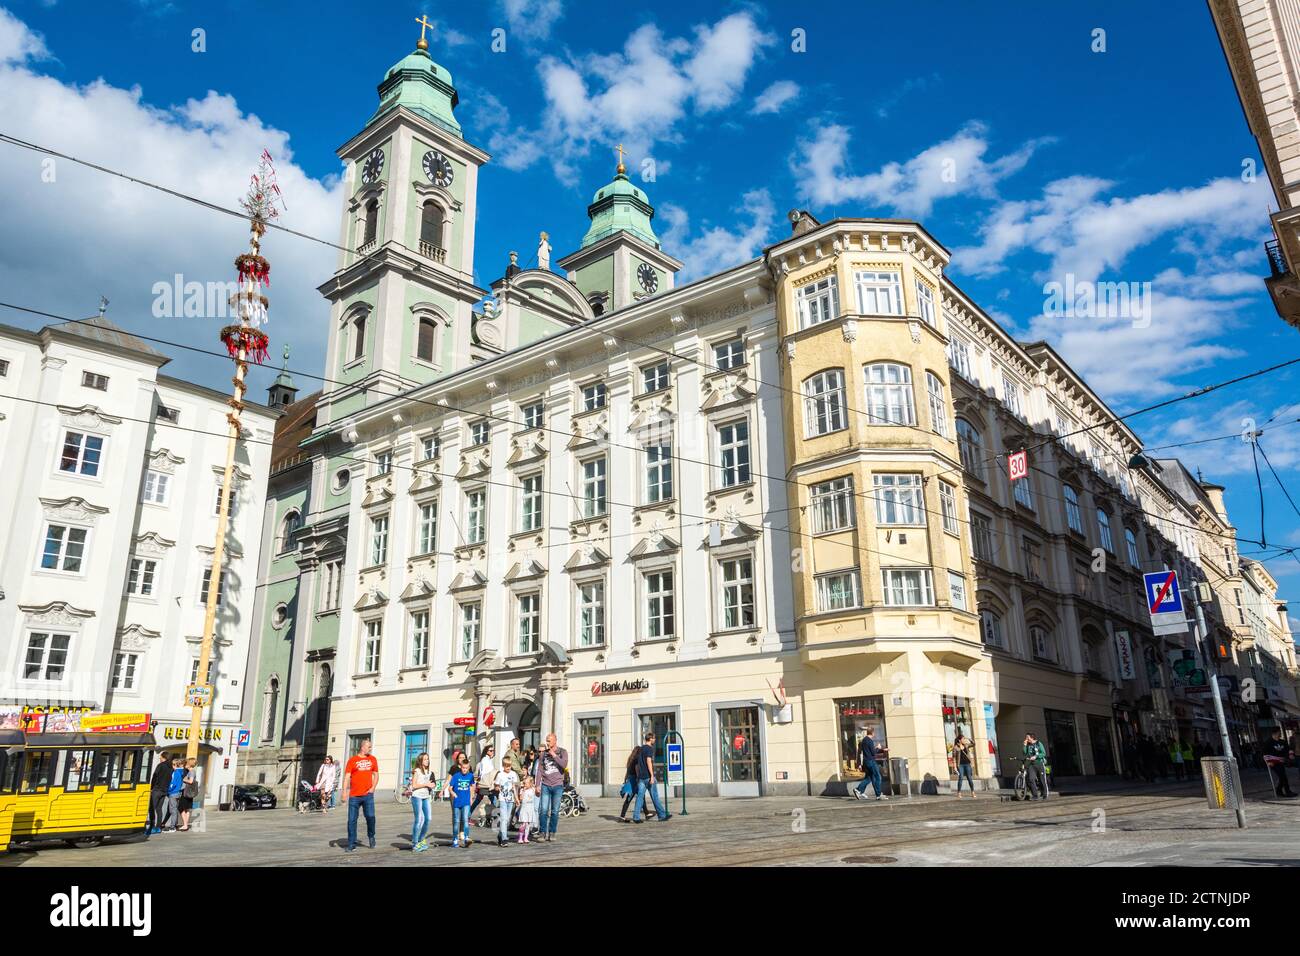 Linz, Austria – May 25, 2017. Street view on Hauptplatz square in Linz, toward Alter Dom, with people. Stock Photo